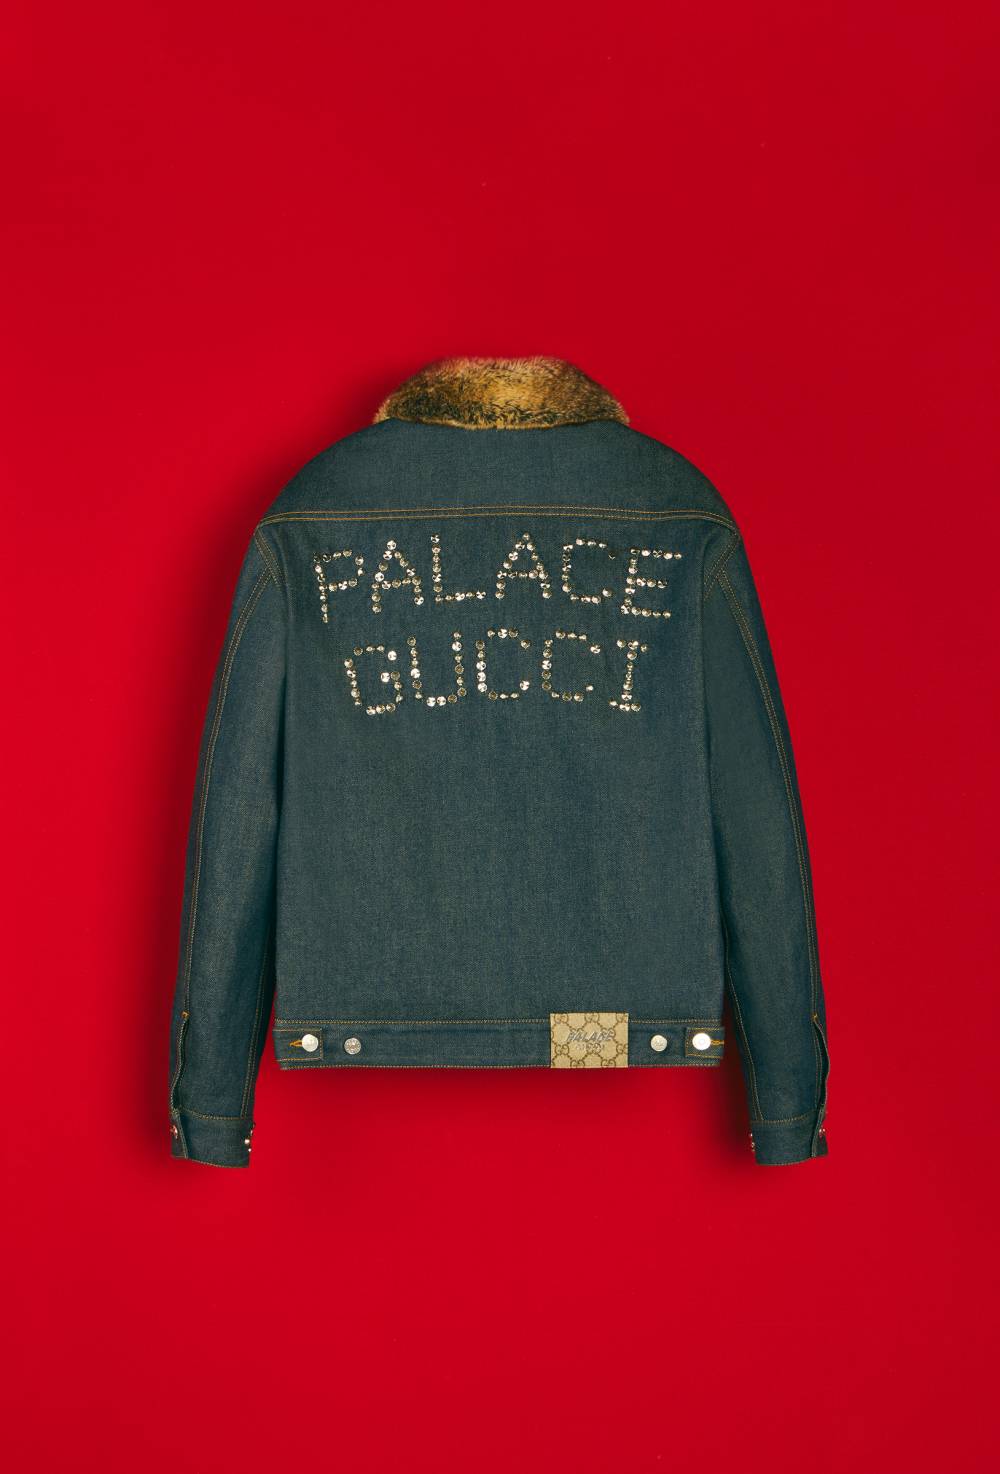 Denim jacket with faux fur, crystals and studs details by Palace Gucci image #2